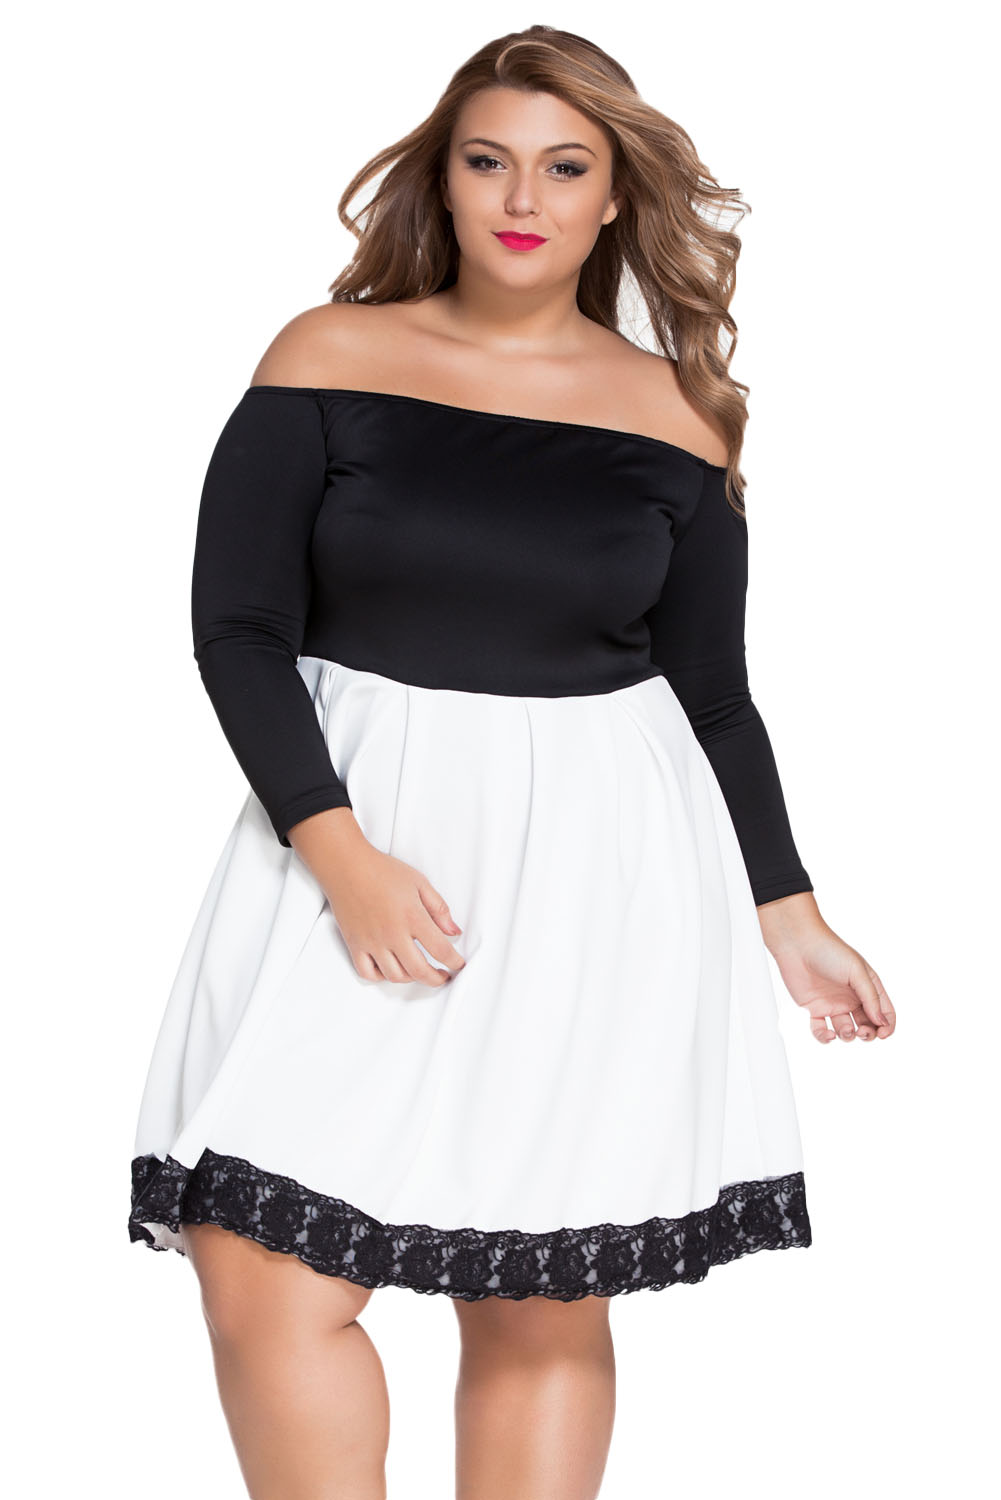 Off The Shoulder Lace Skater Dress : Guide Of Selecting